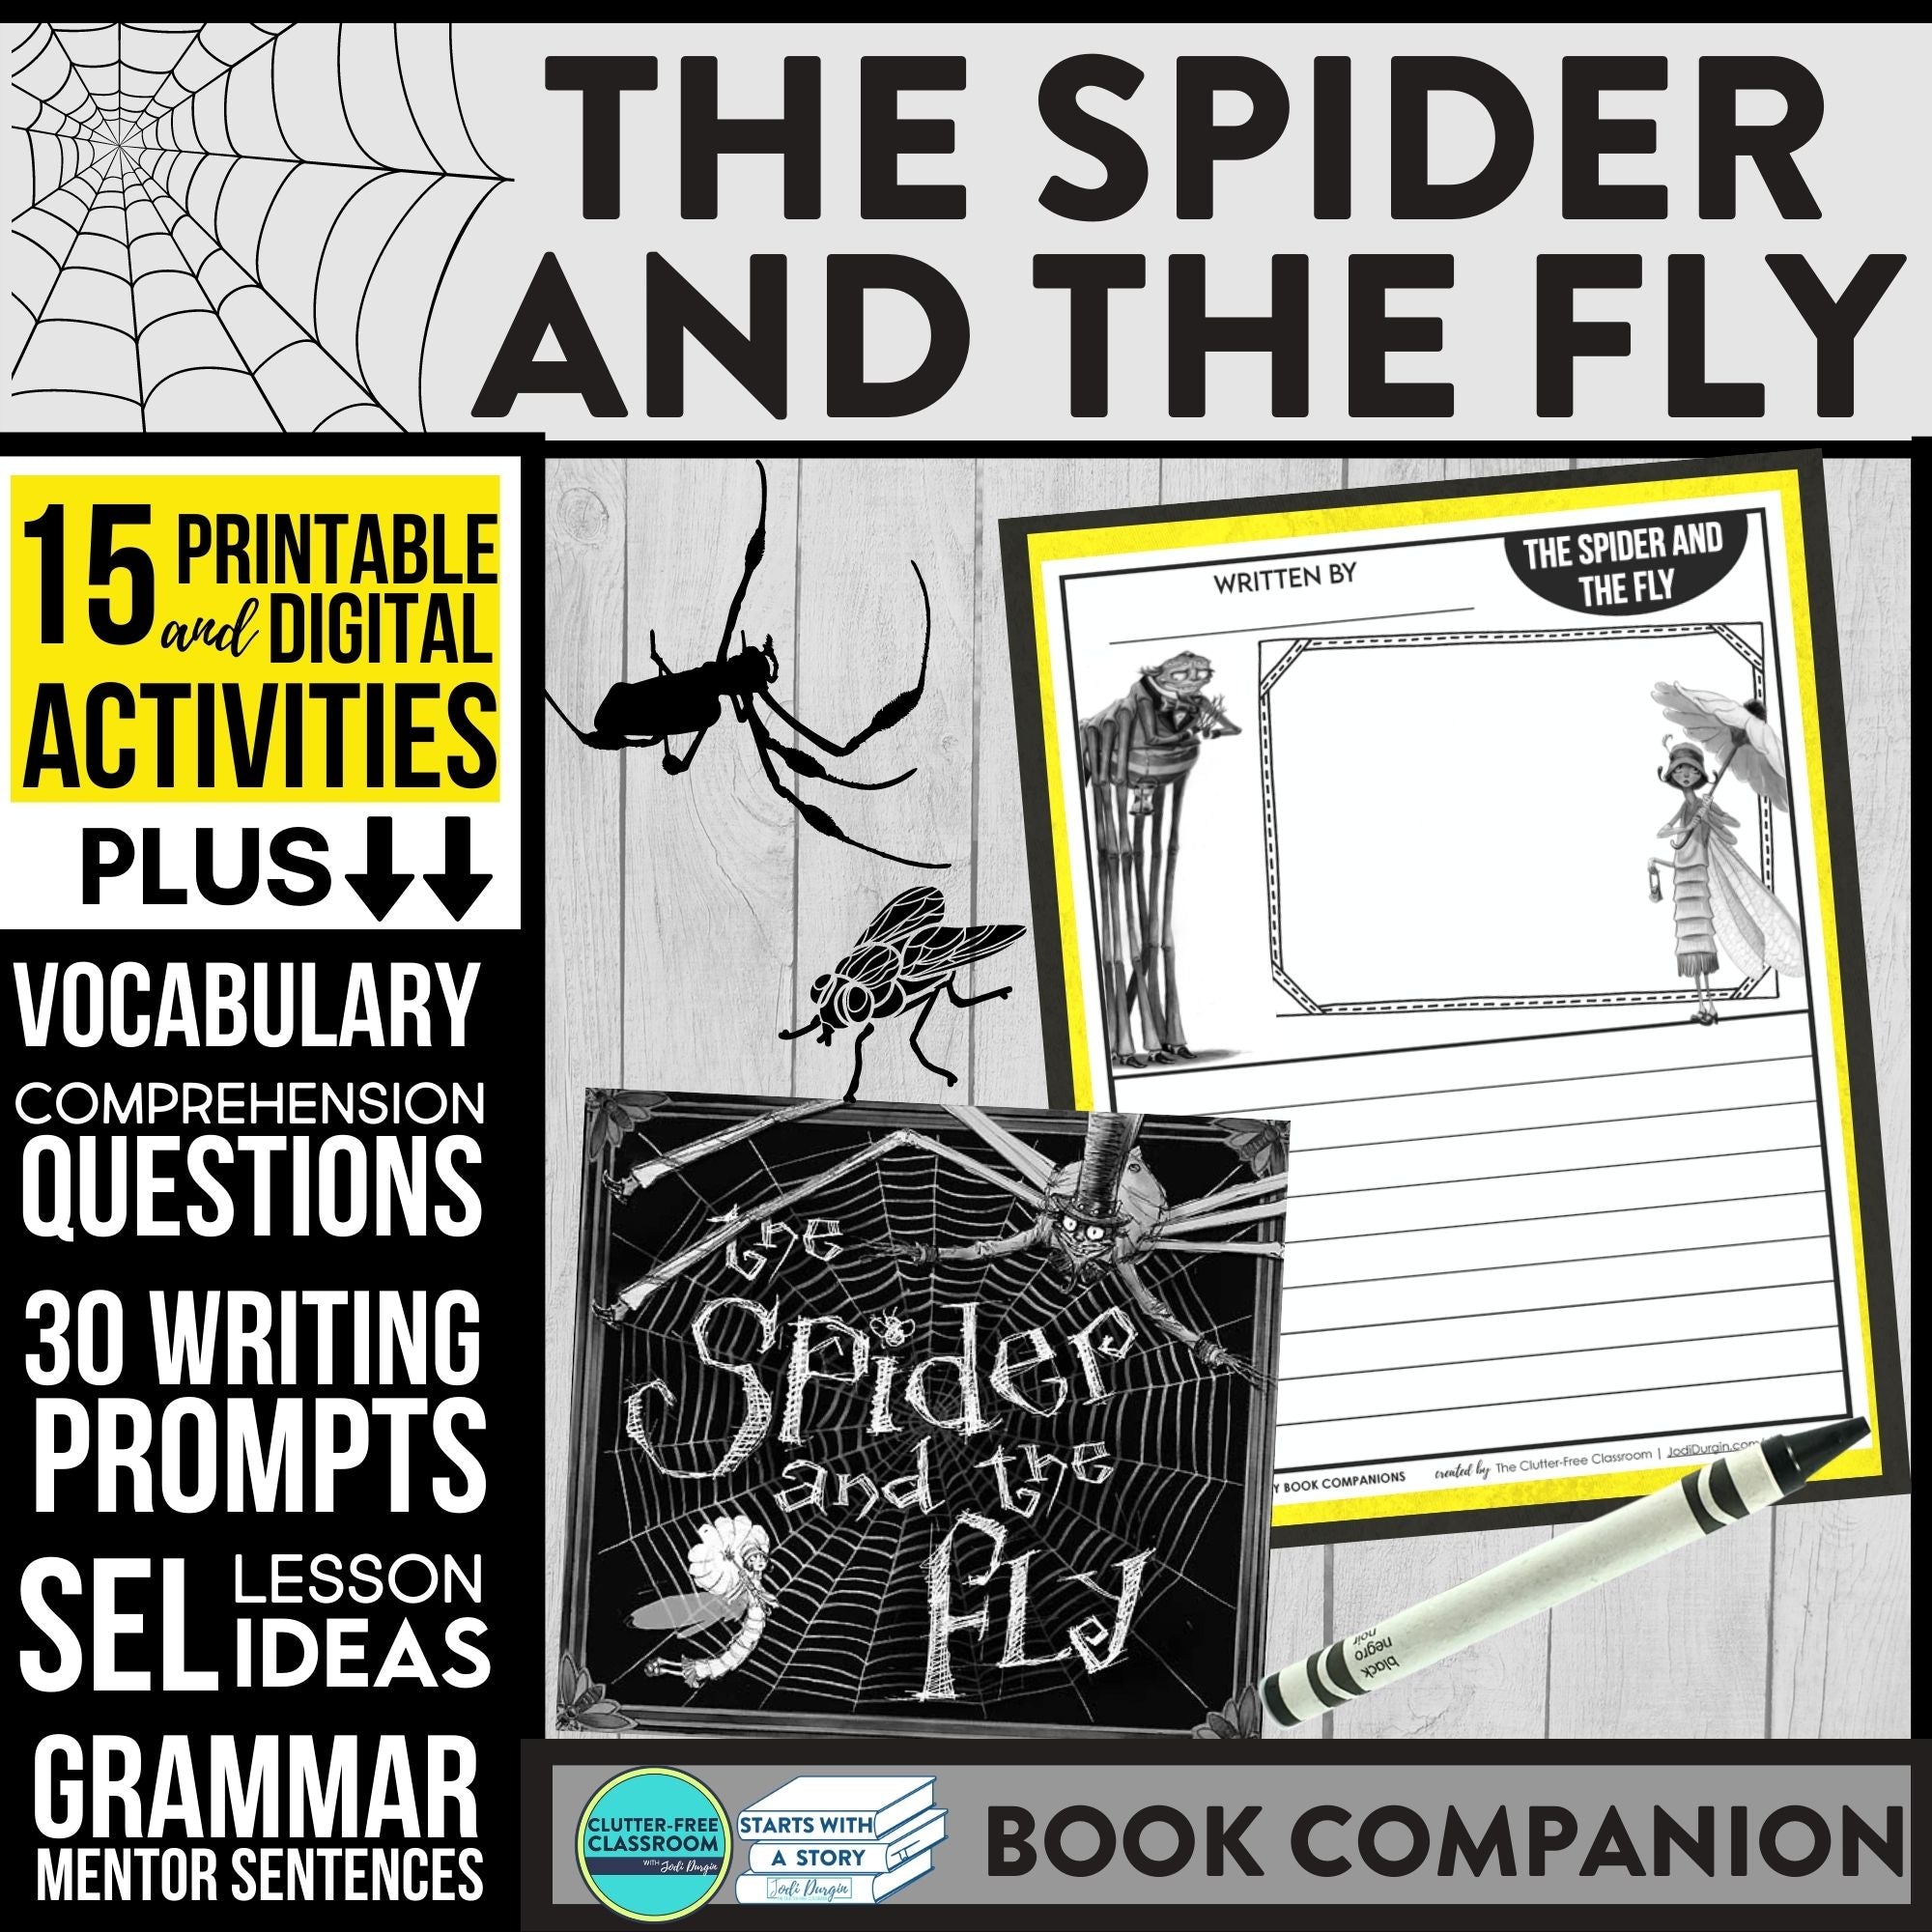 THE SPIDER AND THE FLY activities and lesson plan ideas